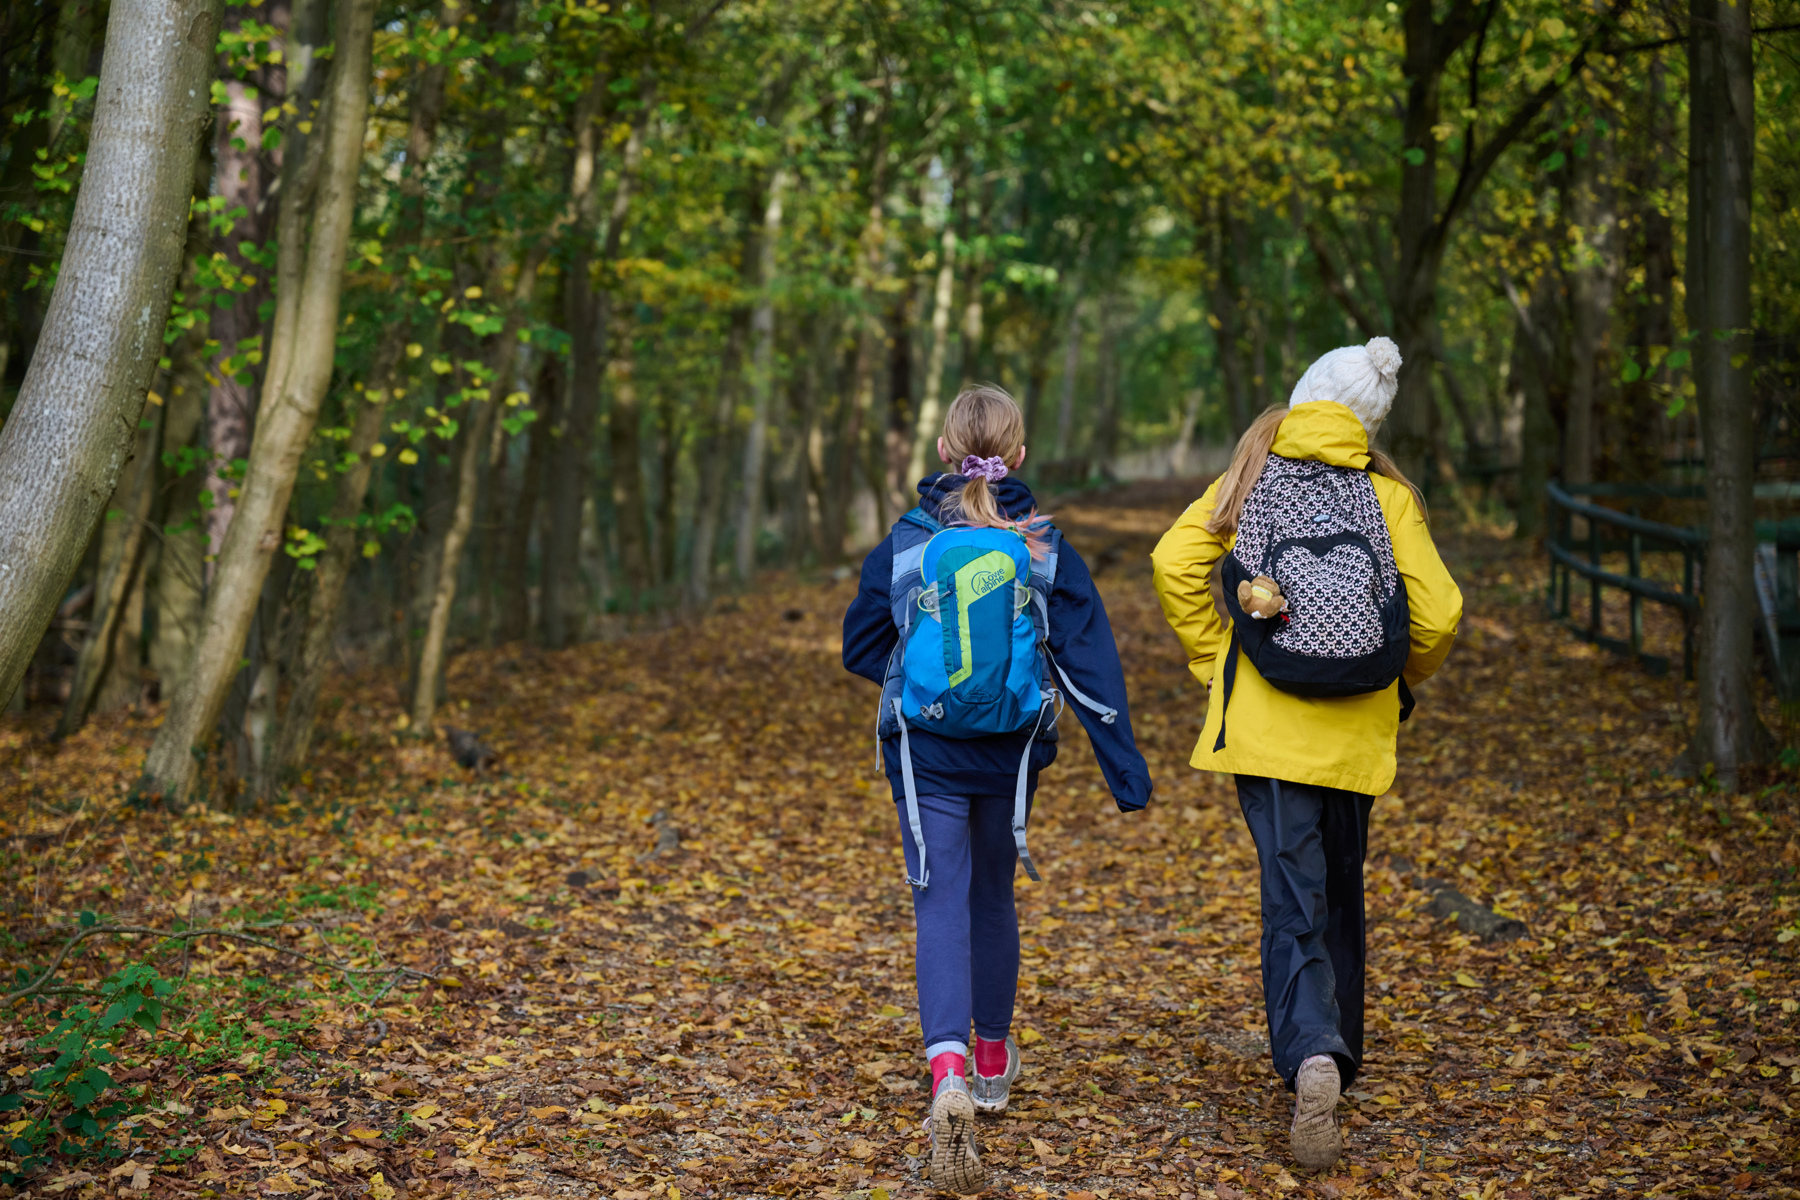 Two Scouts are walking on brown leaves with backpacks on their. back. One Scout on the right is wearing a yellow coat and a hat, and the other is wearing a navy coat and trousers. We can see the back of them as they walk through trees in a forest. 